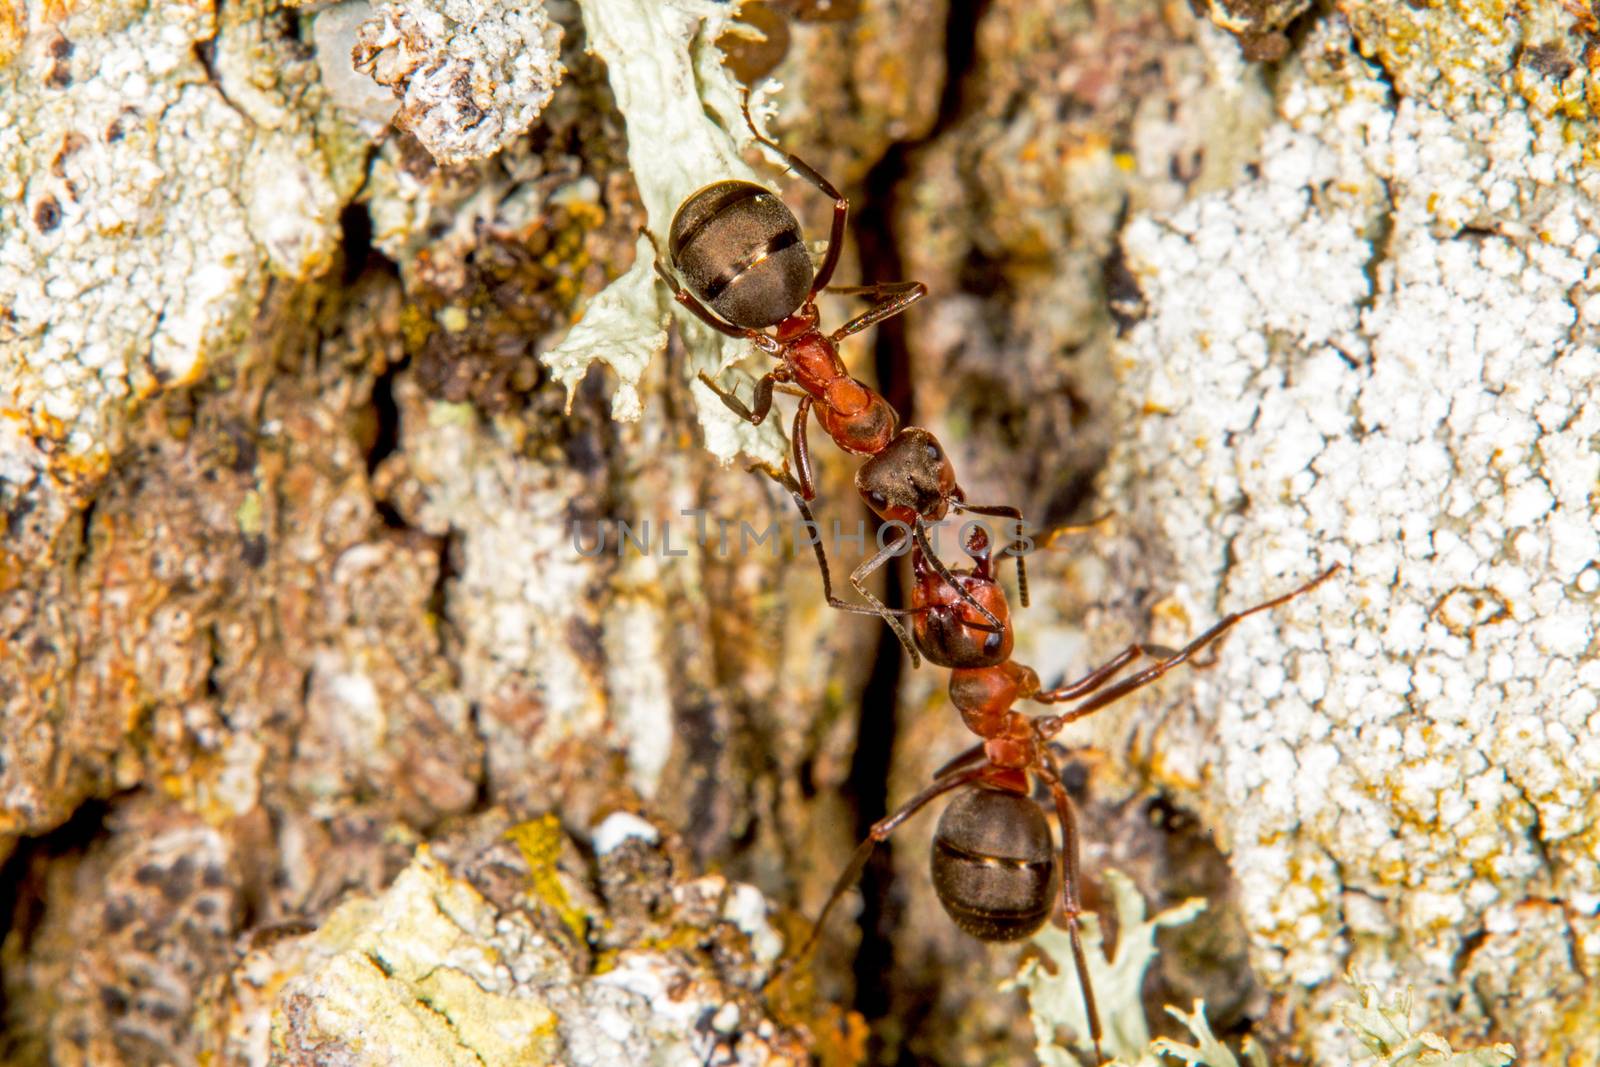 Red wood ants by thomas_males